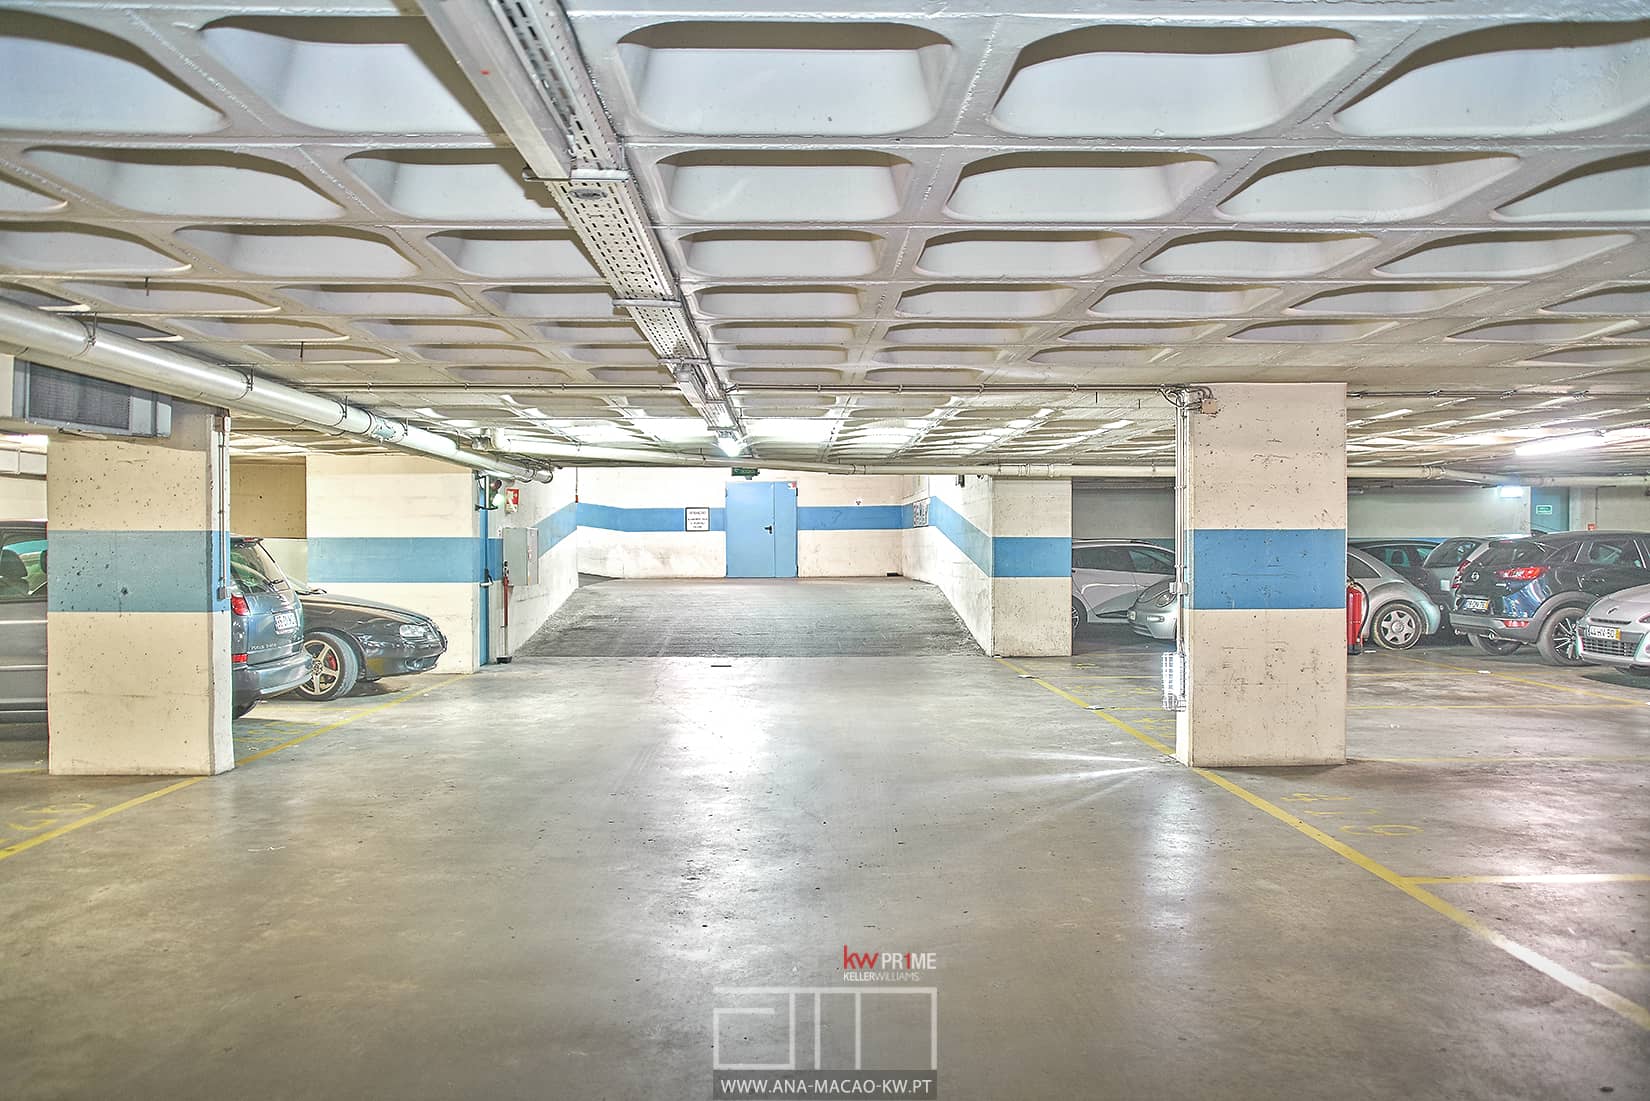 Garage with space for 4 cars